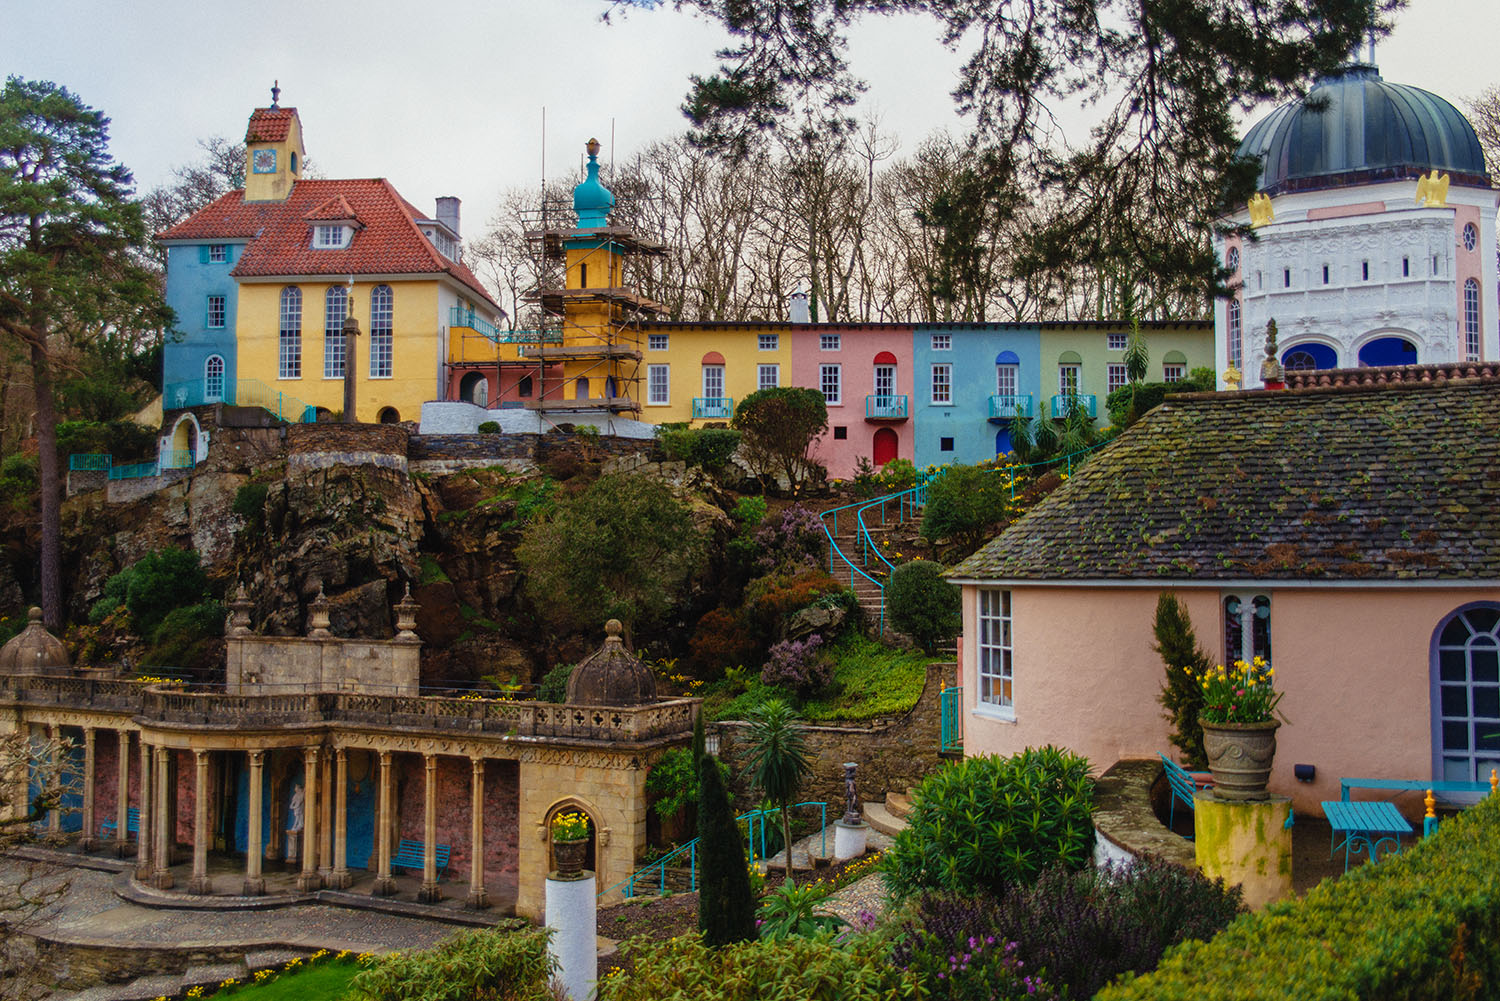 Portmeirion Village in Wales